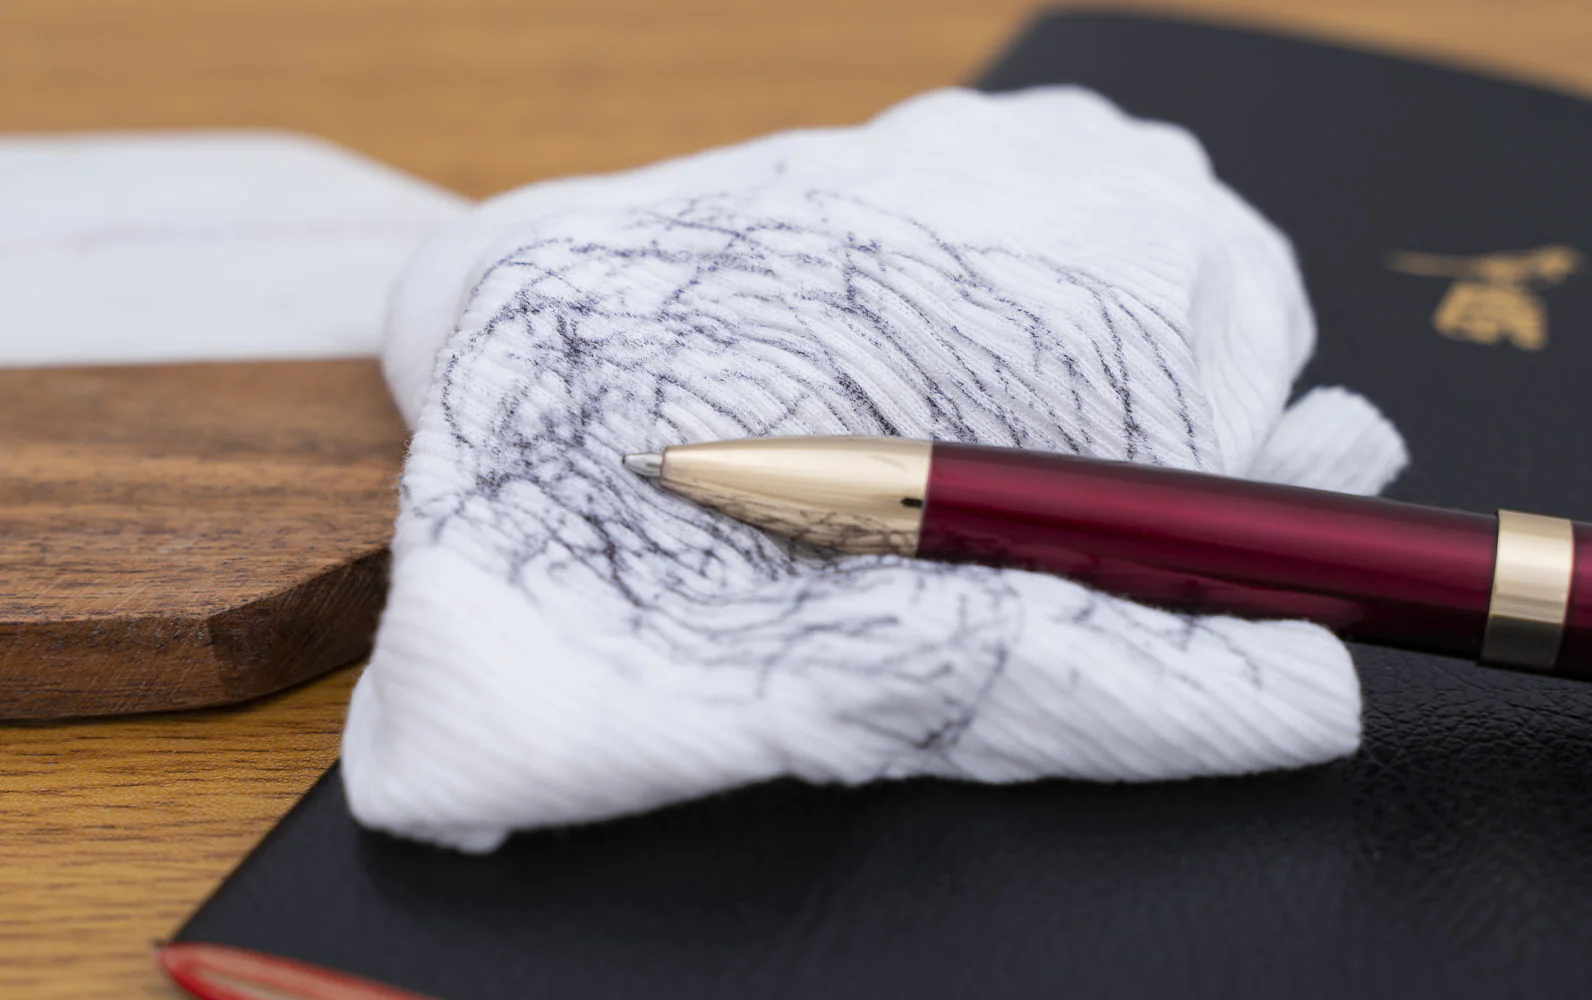 How to Remove Ballpoint Pen Stains? Tips and Tricks: